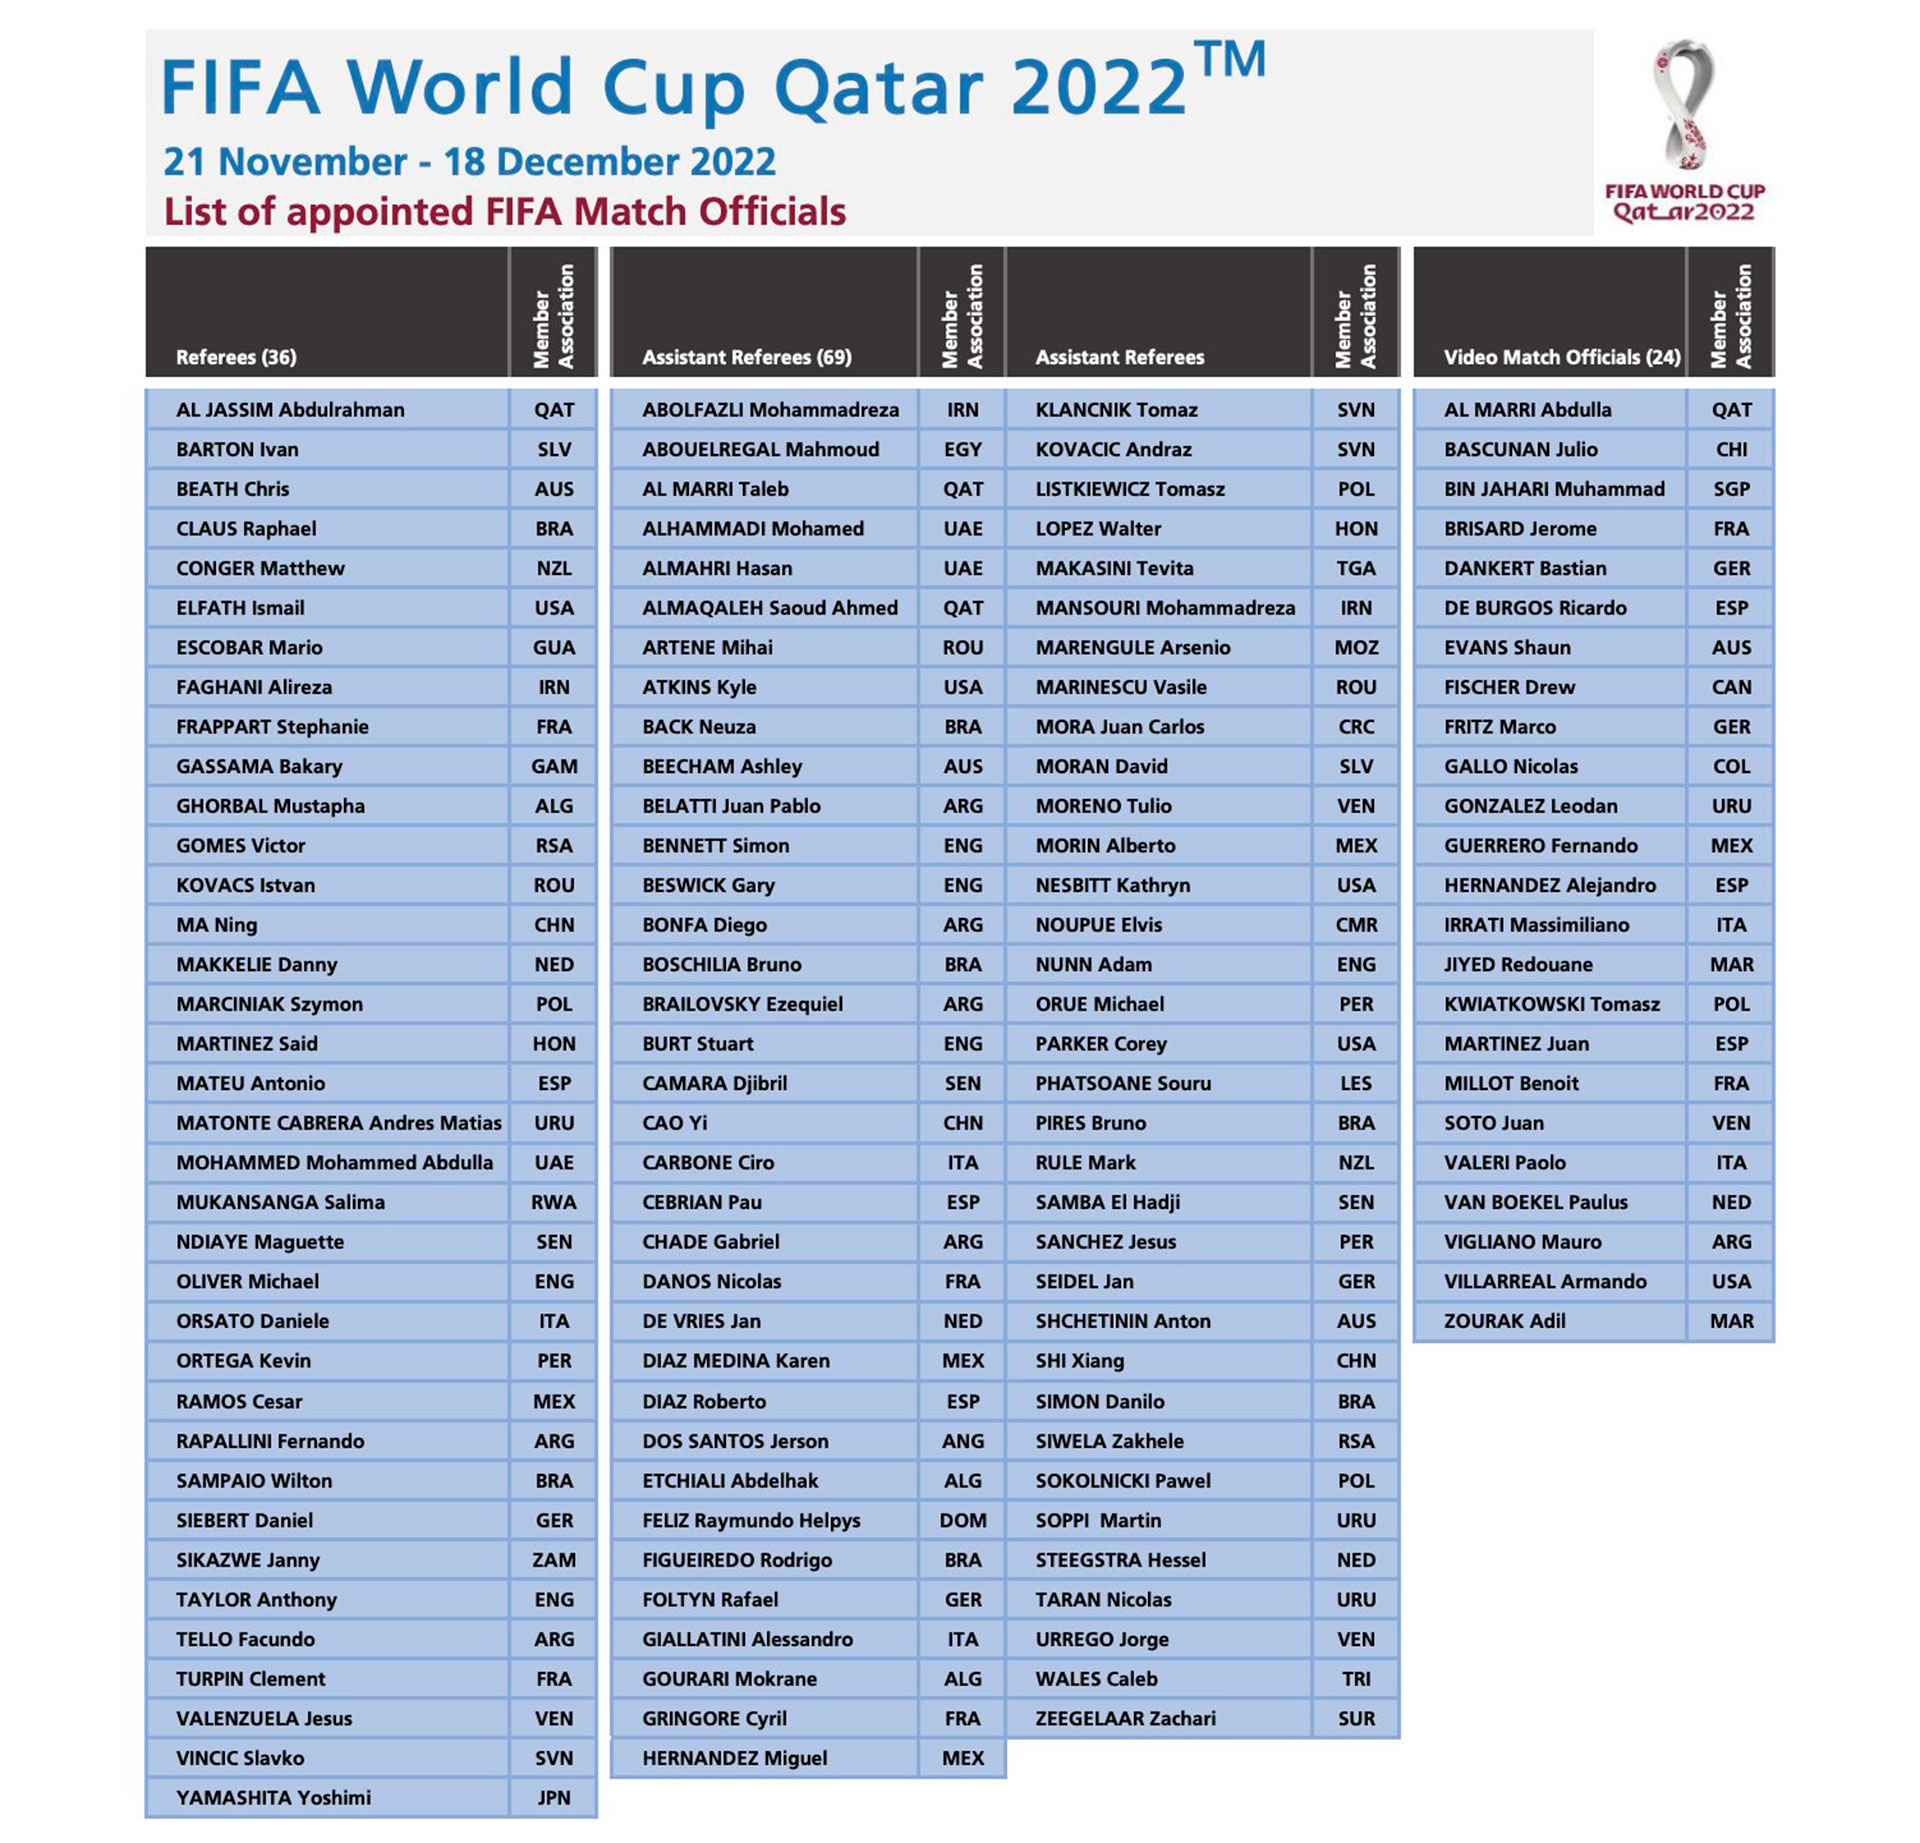 The complete list of referees for Qatar 2022